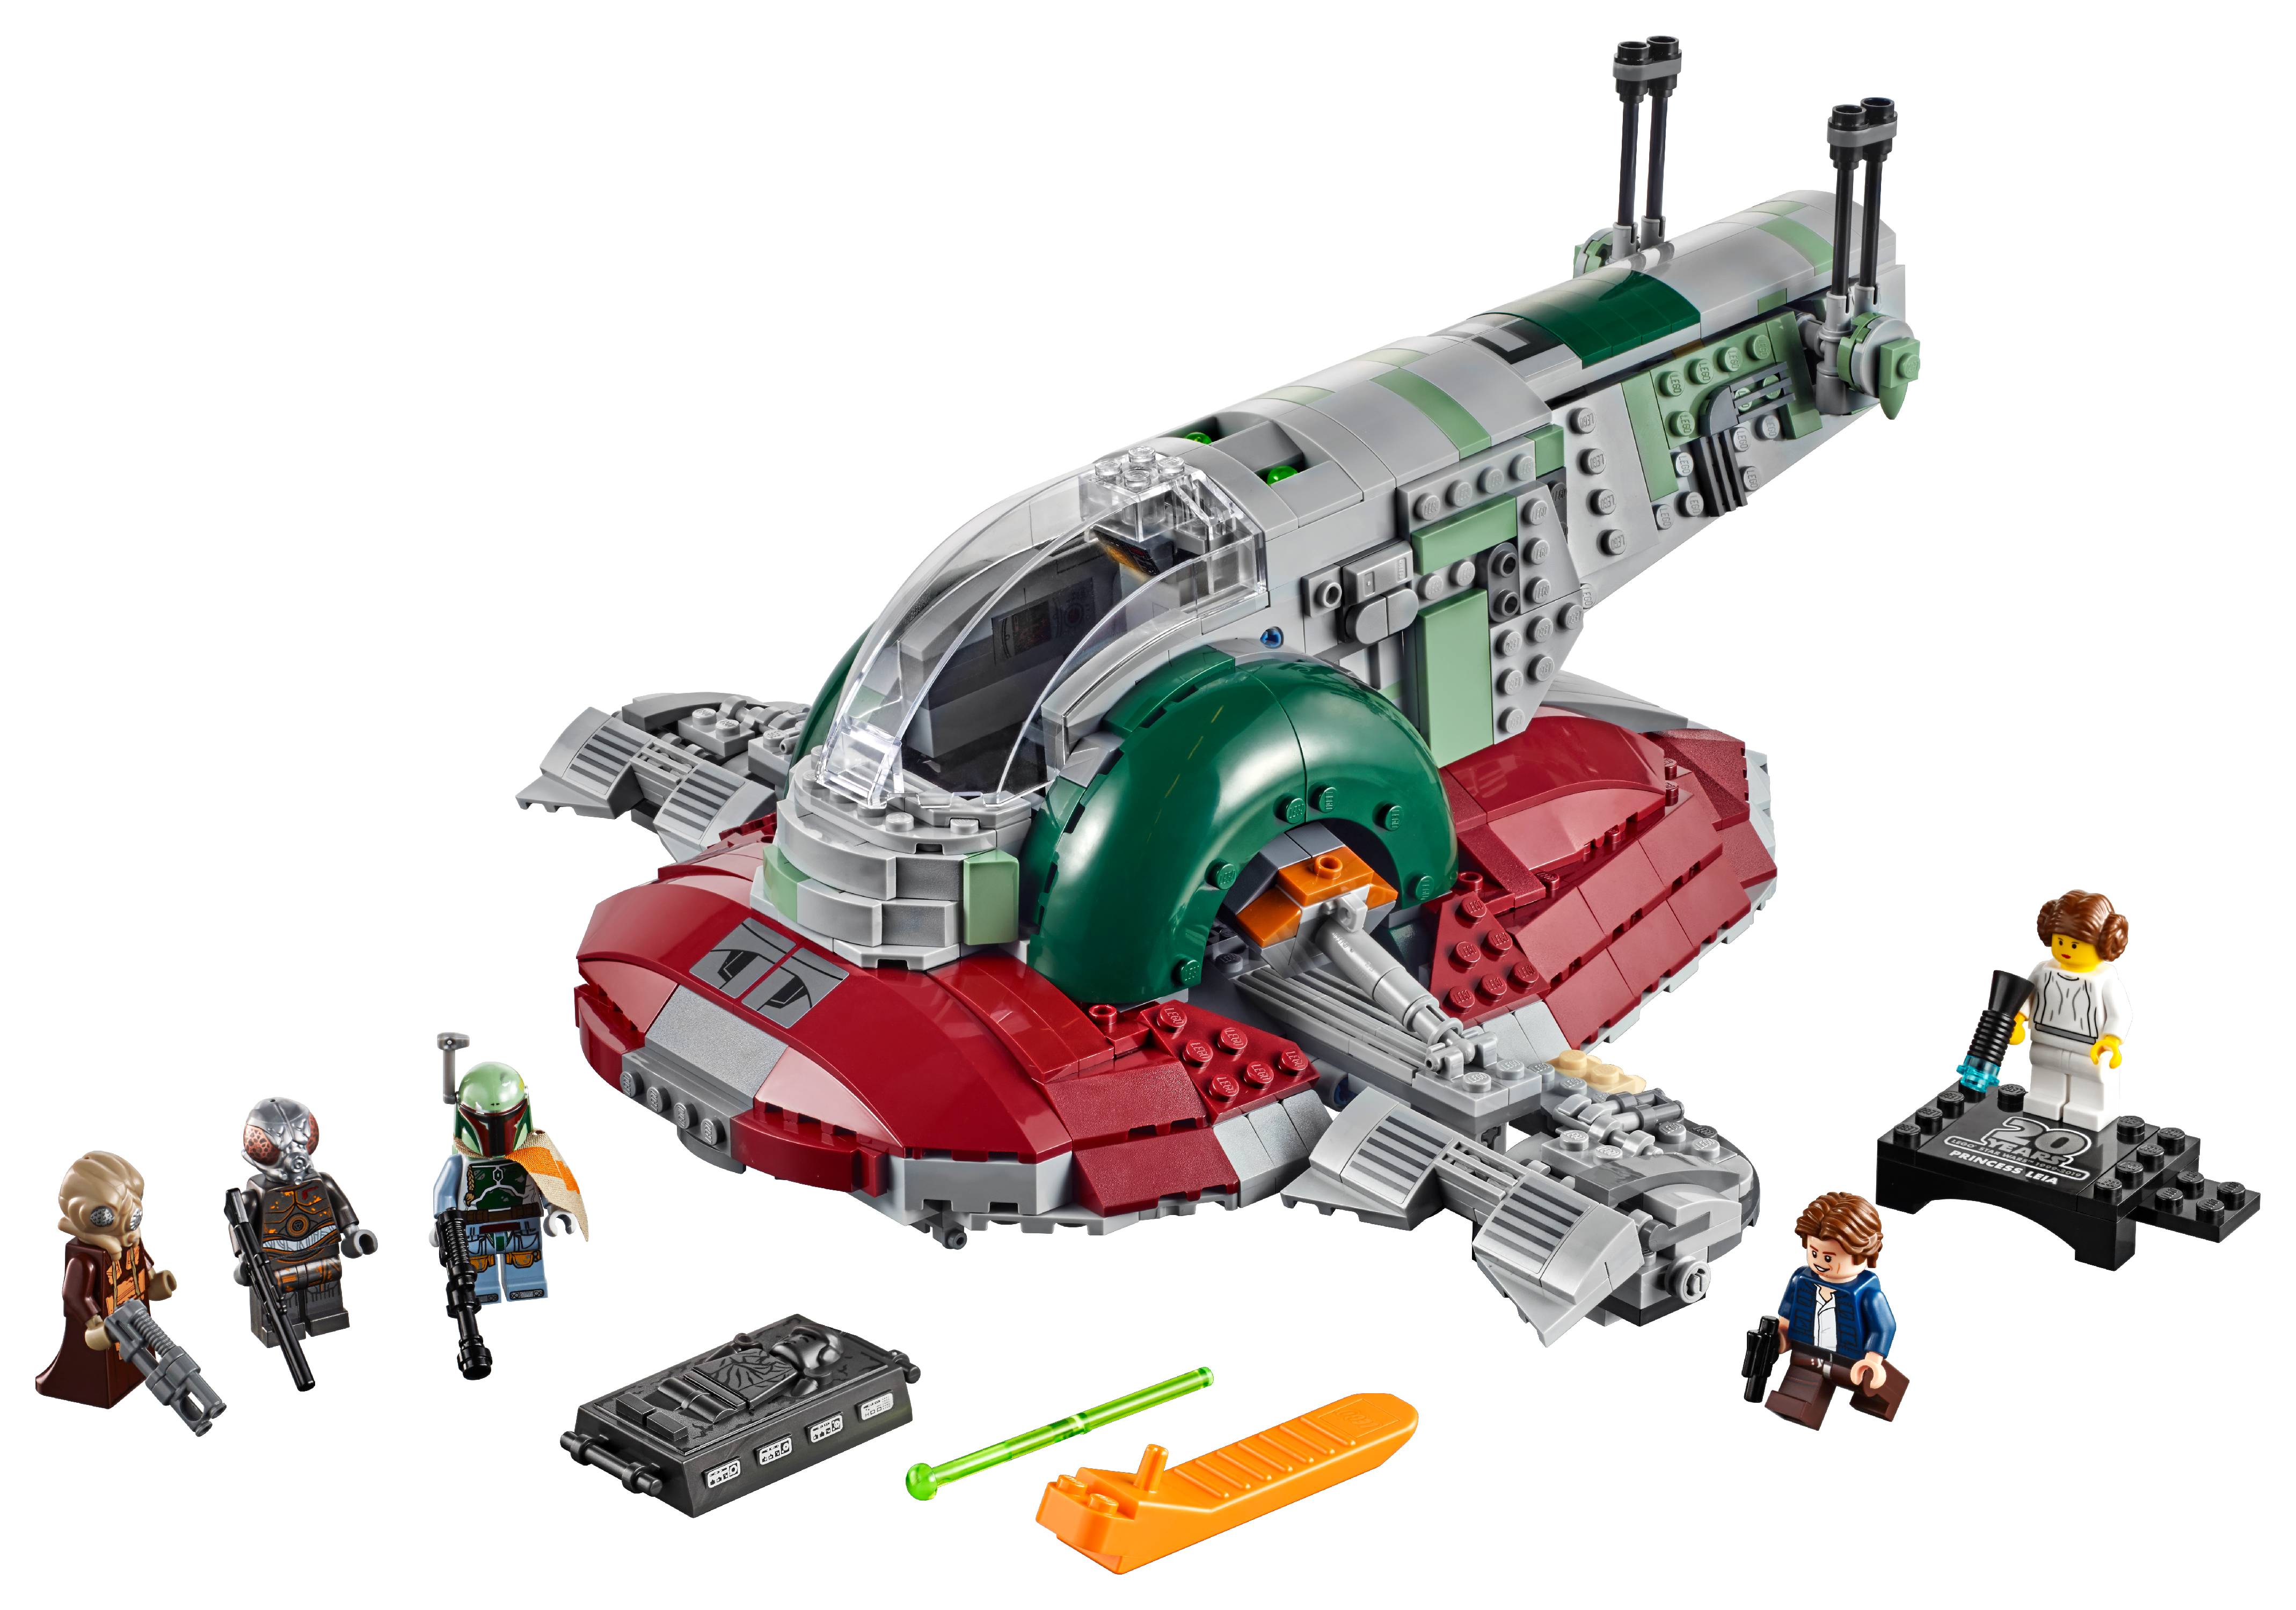 LEGO 75243 Star Wars Slave 20th Anniversary Collector Edition Collectible Model Building Kit - image 3 of 8